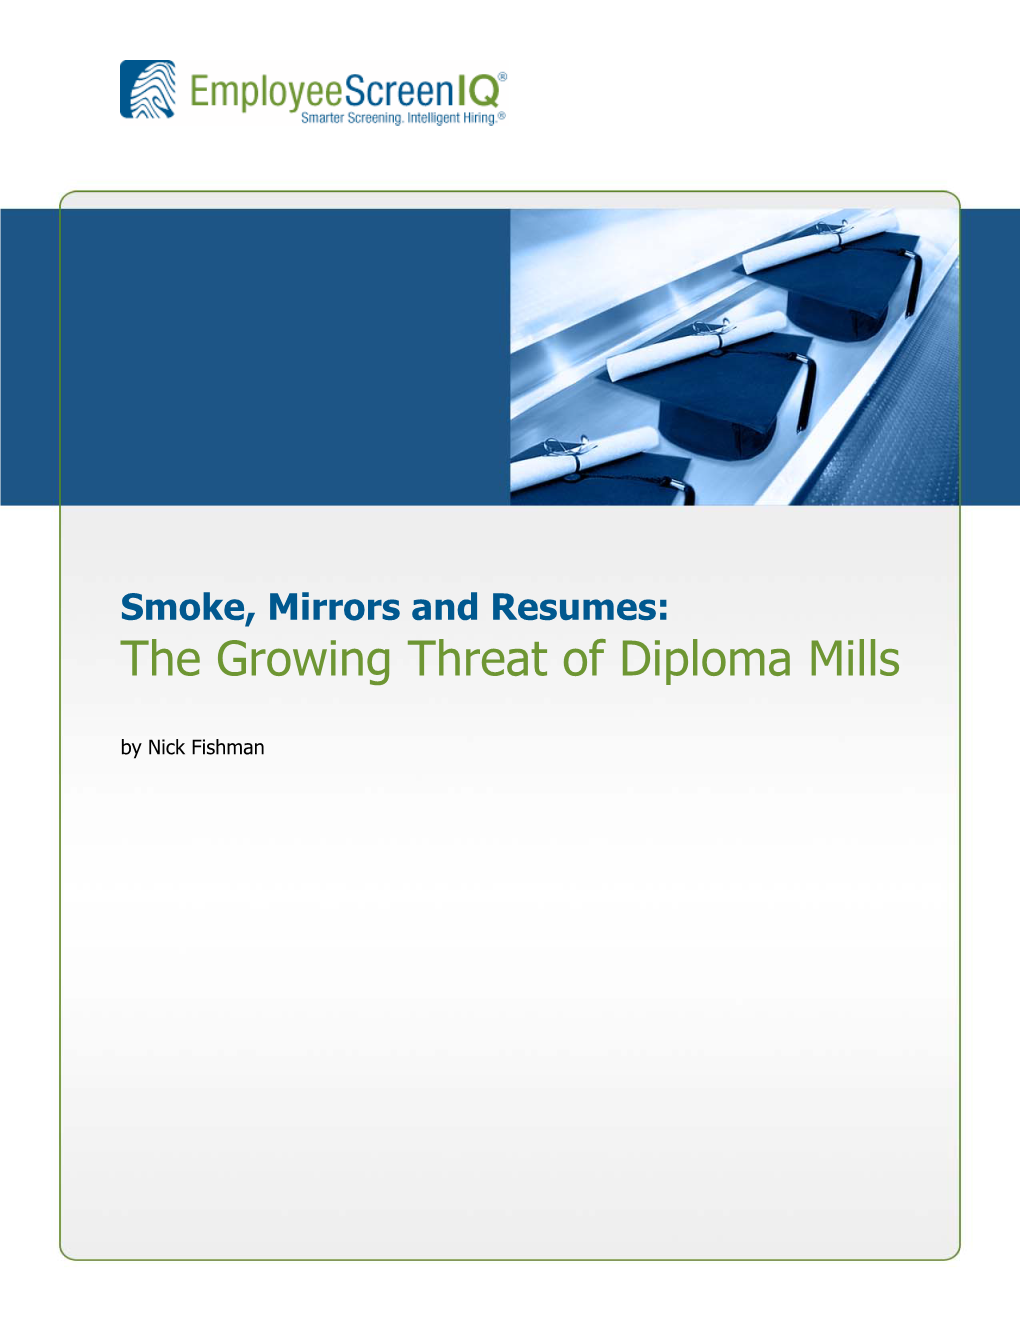 The Growing Threat of Diploma Mills